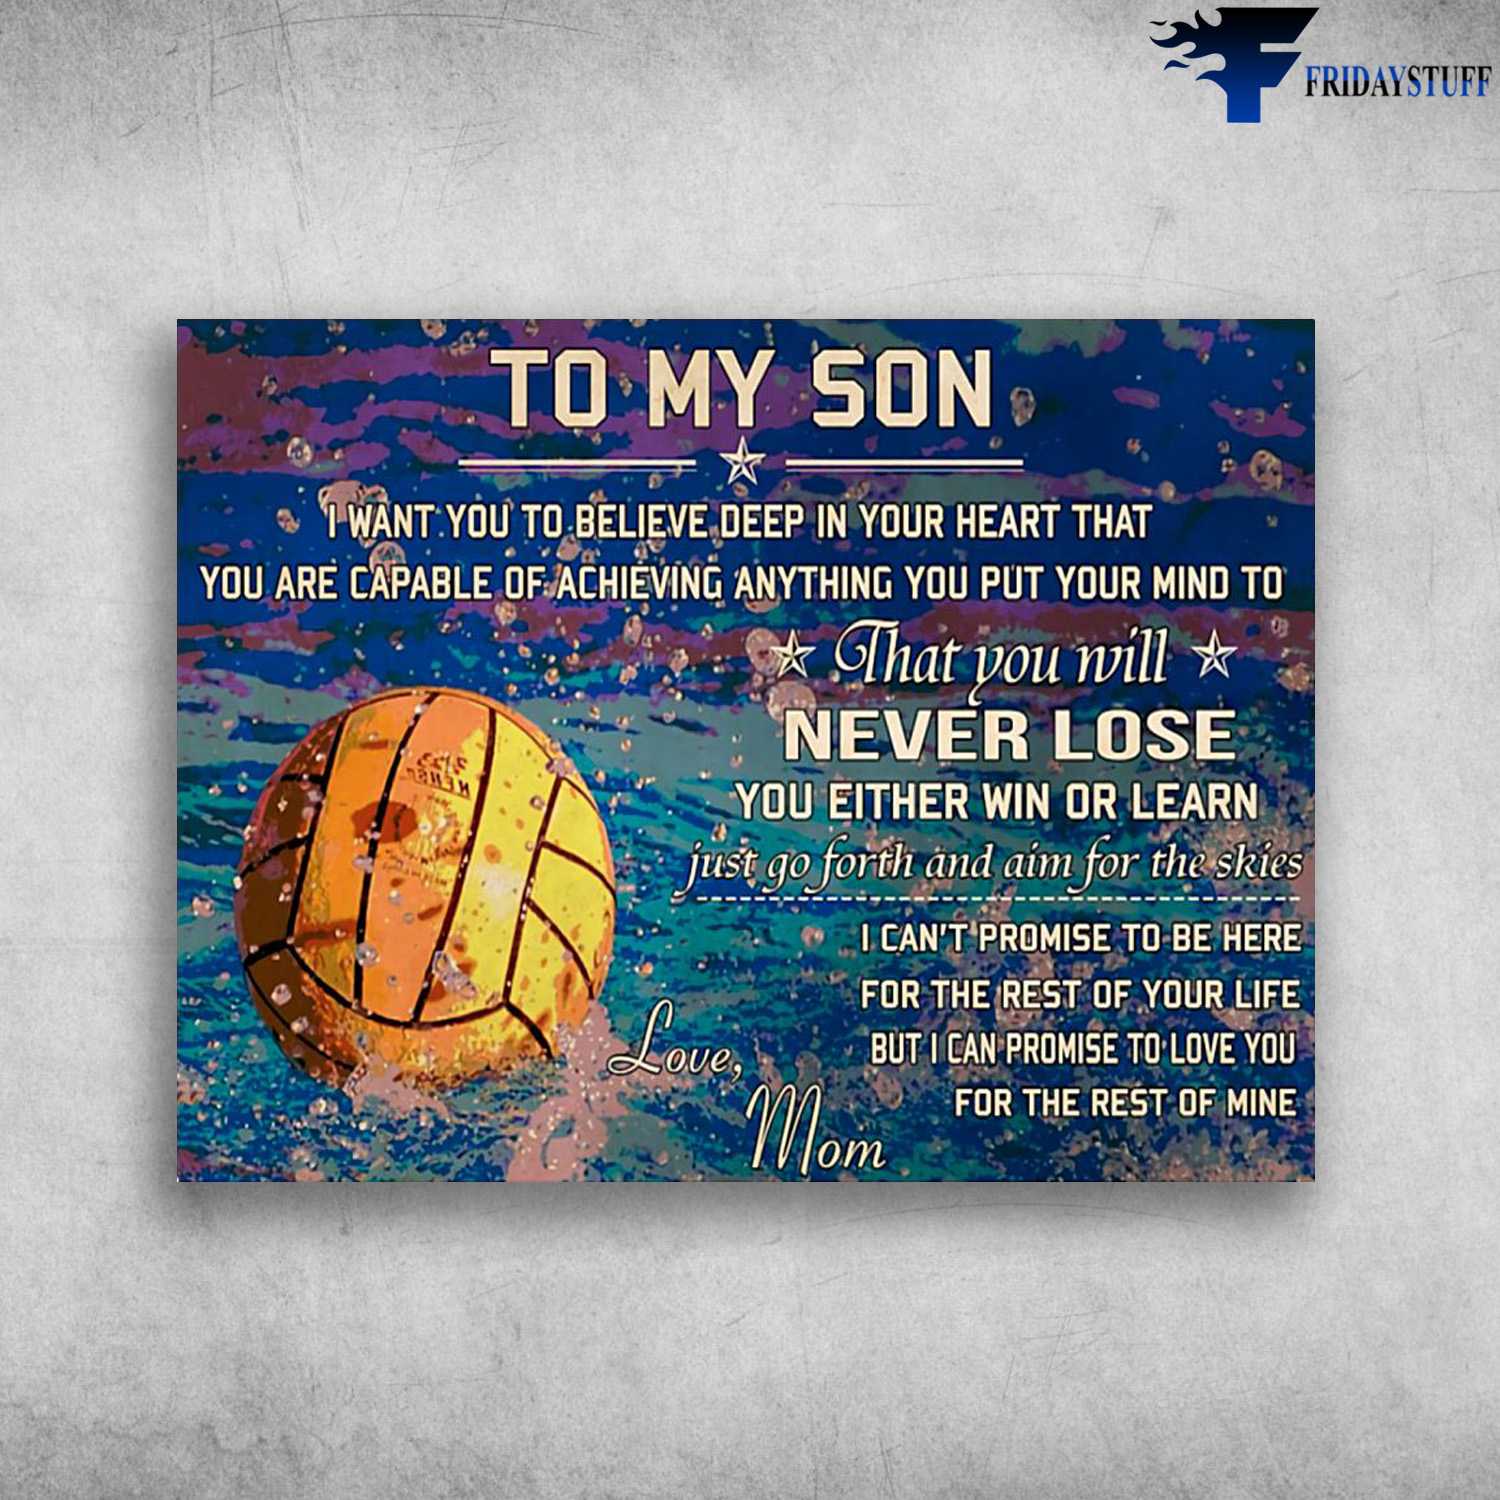 Water Polo Poster, Water Polo Lover, Mom And Son, To My Son, I Want You To Believe Deep In Your Heart, That You're Capable Of Achieving, Anything You Put Your Mind To